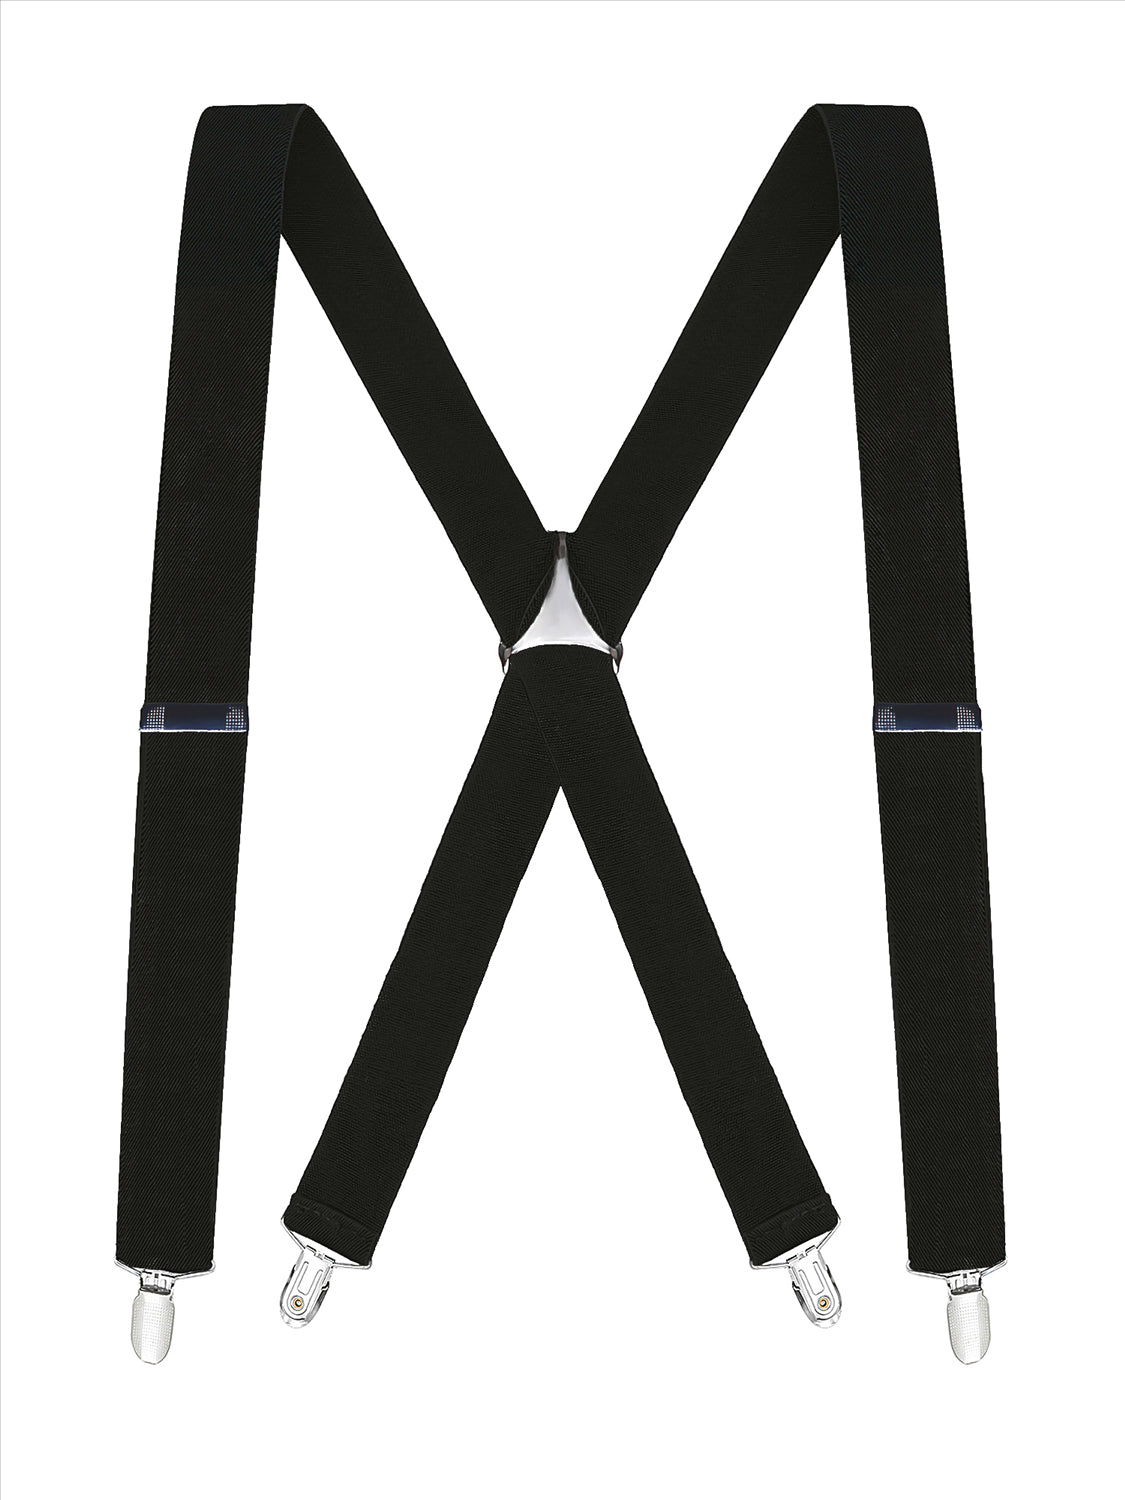 Buyless Fashion Suspenders for Men - 48